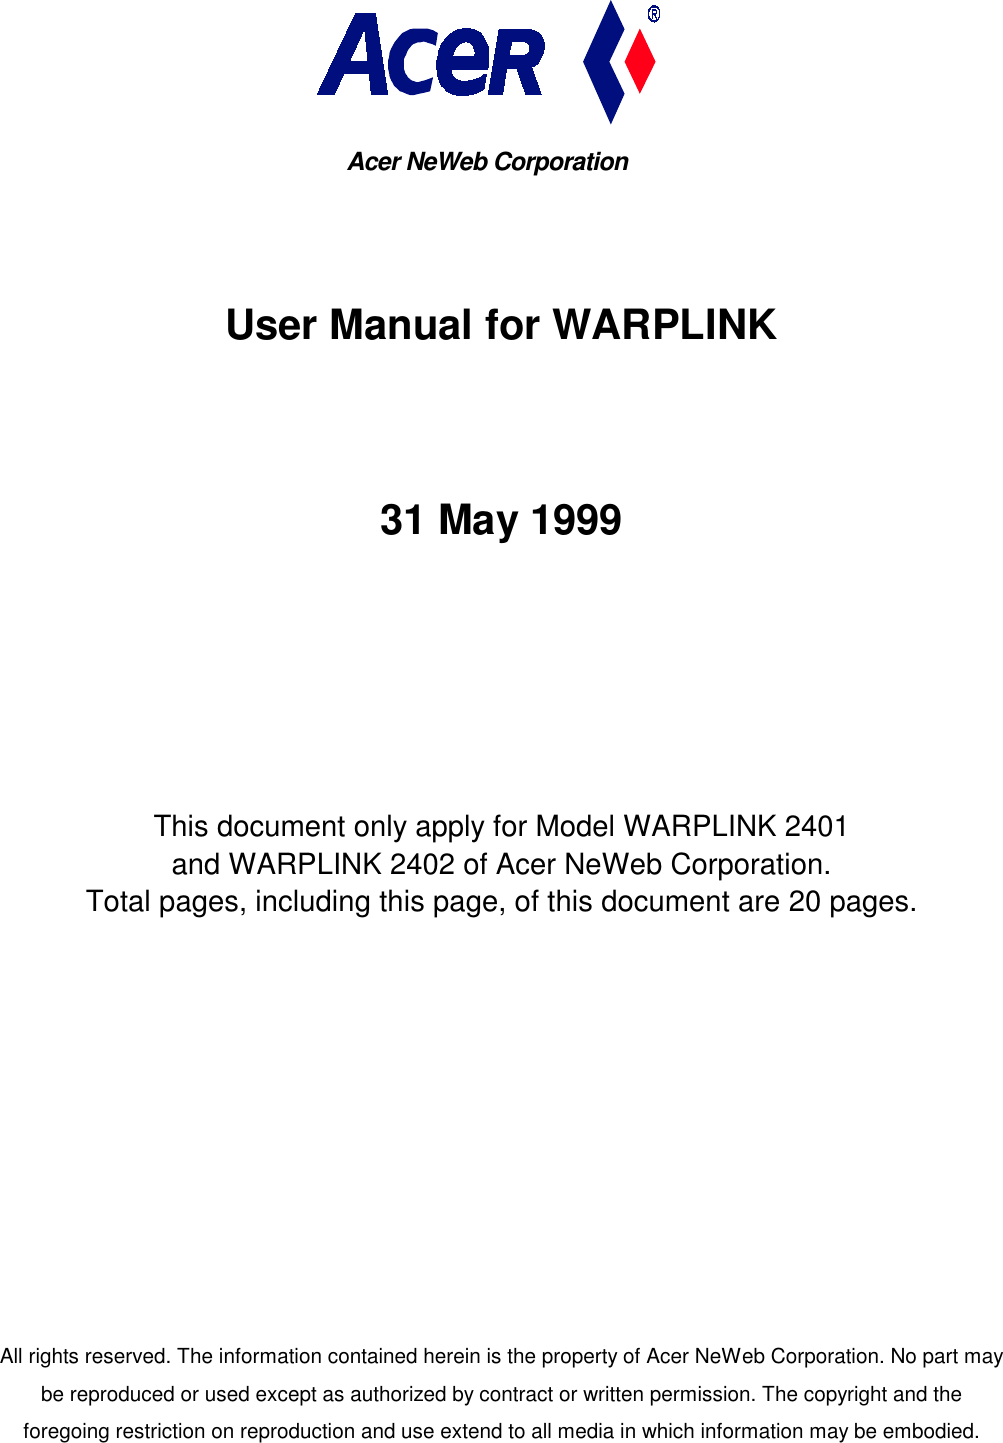 User Manual for WARPLINK31 May 1999This document only apply for Model WARPLINK 2401and WARPLINK 2402 of Acer NeWeb Corporation.Total pages, including this page, of this document are 20 pages.All rights reserved. The information contained herein is the property of Acer NeWeb Corporation. No part maybe reproduced or used except as authorized by contract or written permission. The copyright and theforegoing restriction on reproduction and use extend to all media in which information may be embodied.Acer NeWeb Corporation